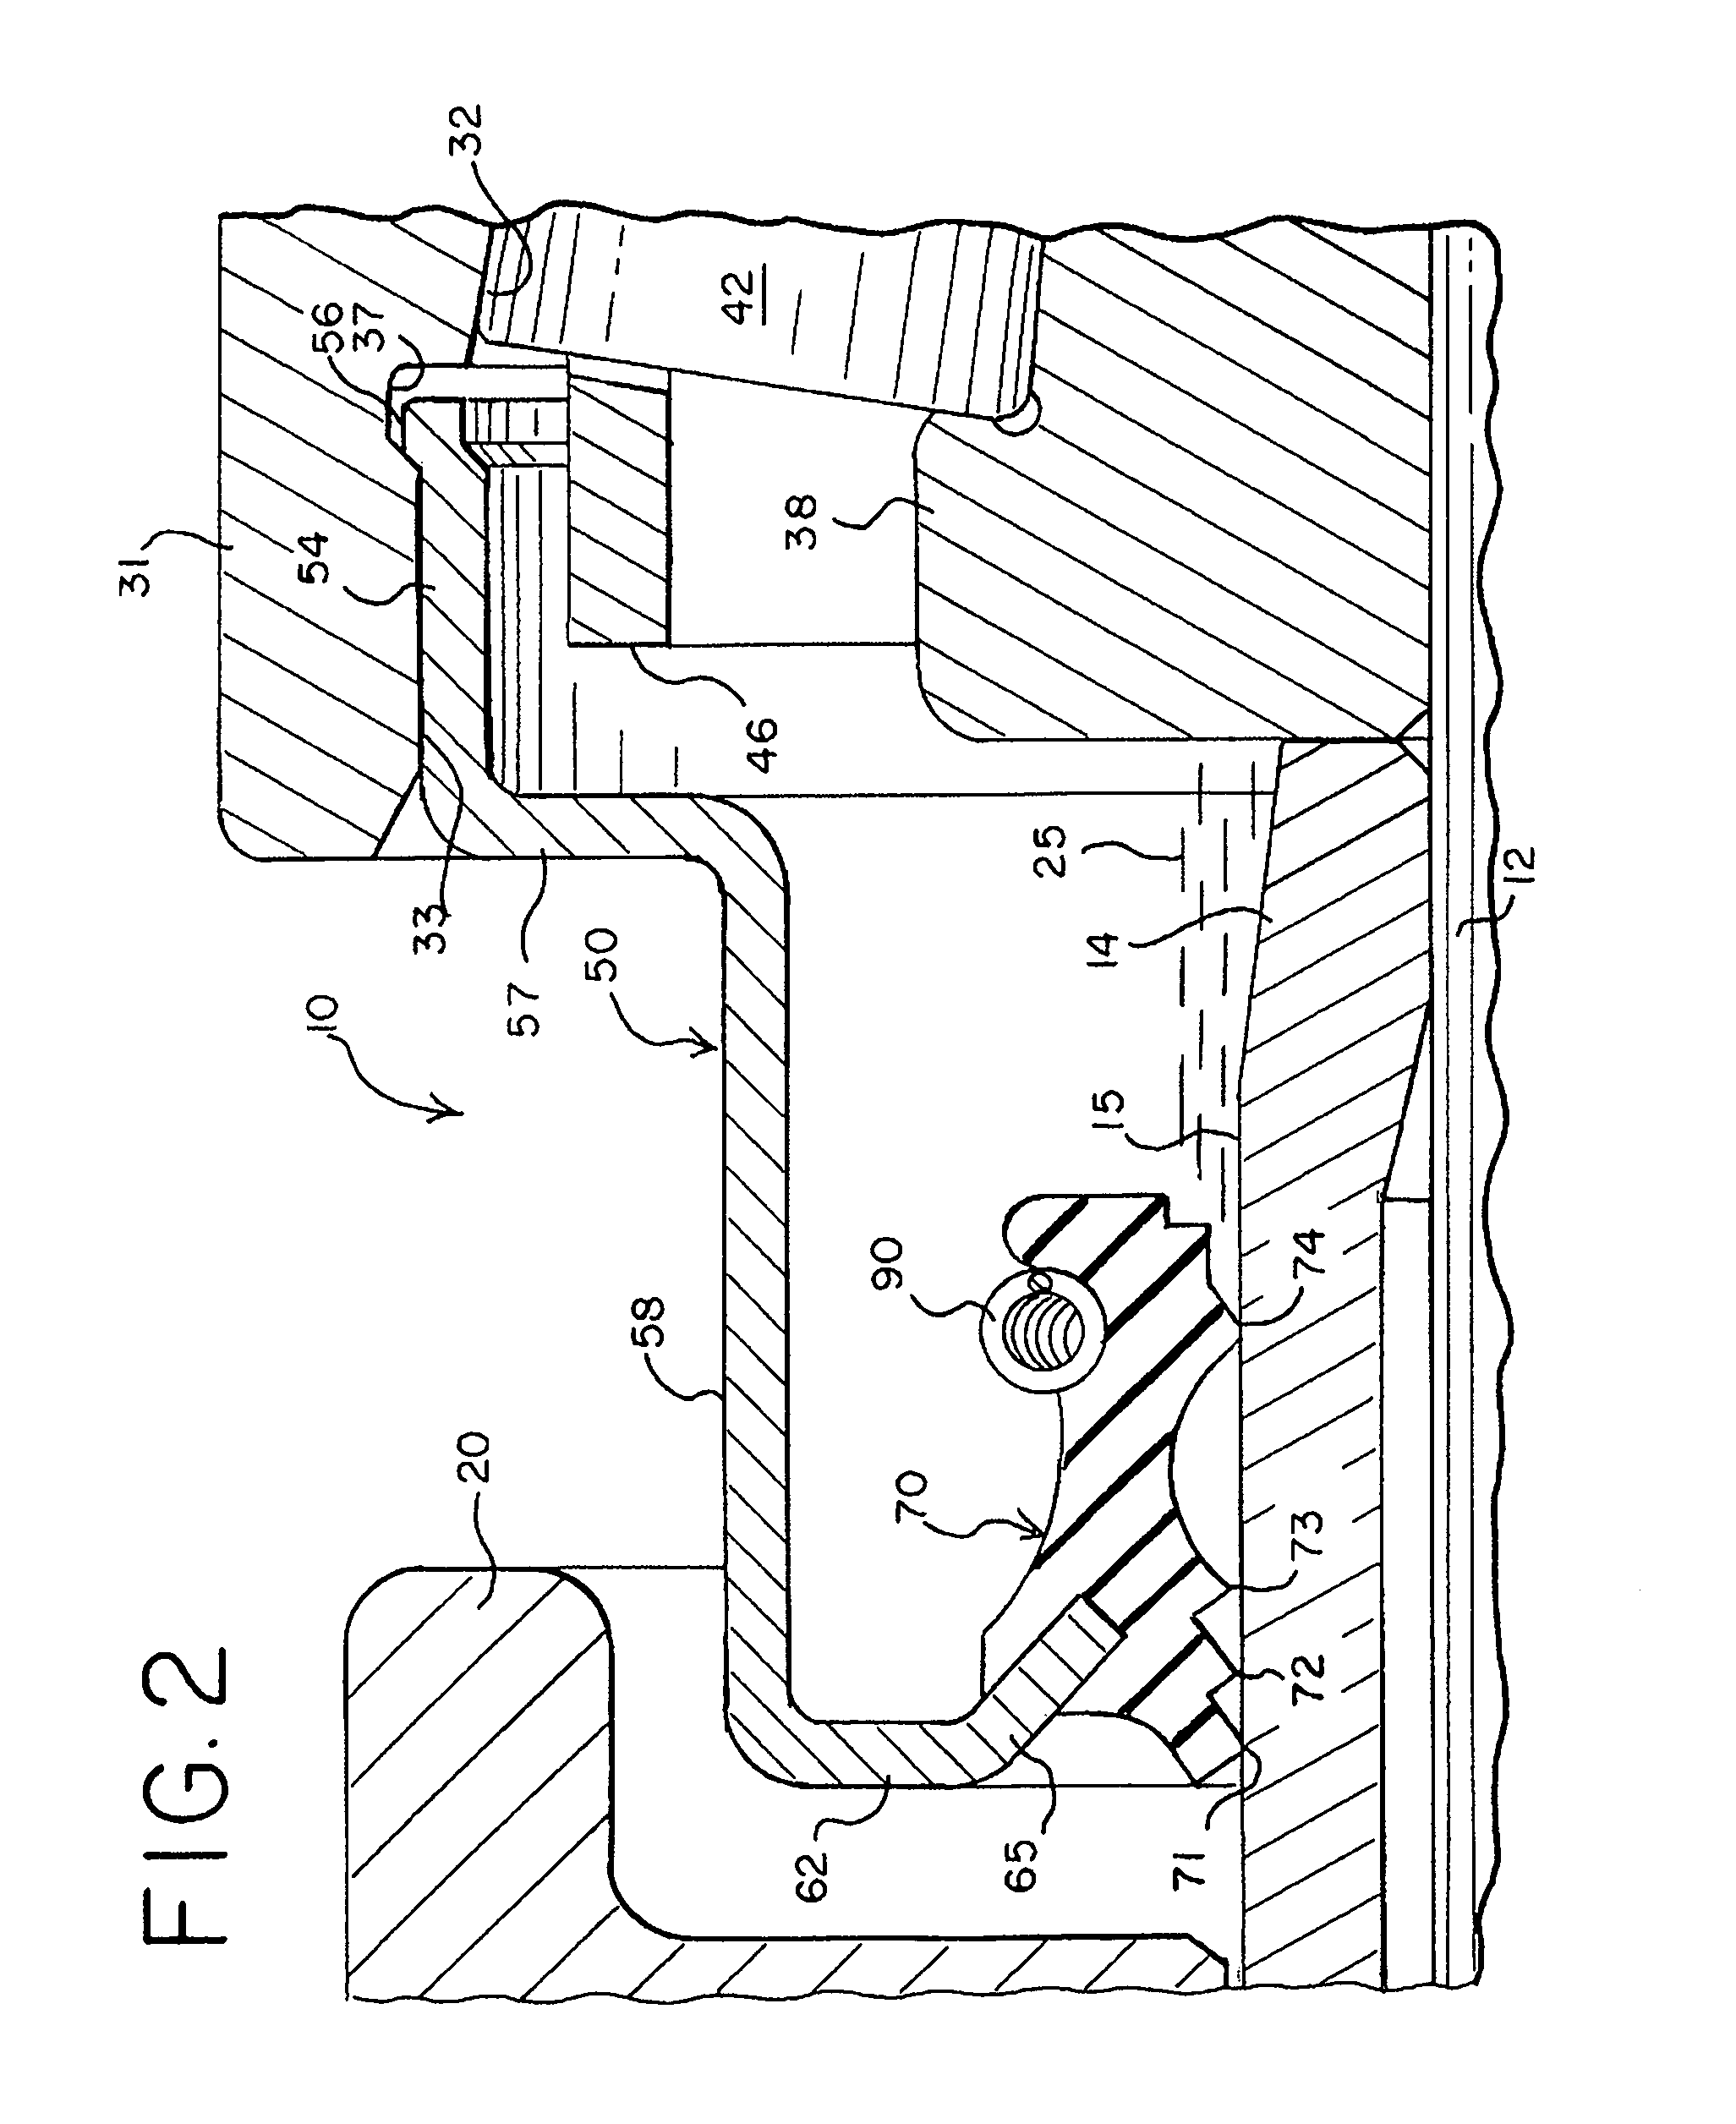 Bearing assembly having a dust seal arrangement with contacting and non-contacting dust seals